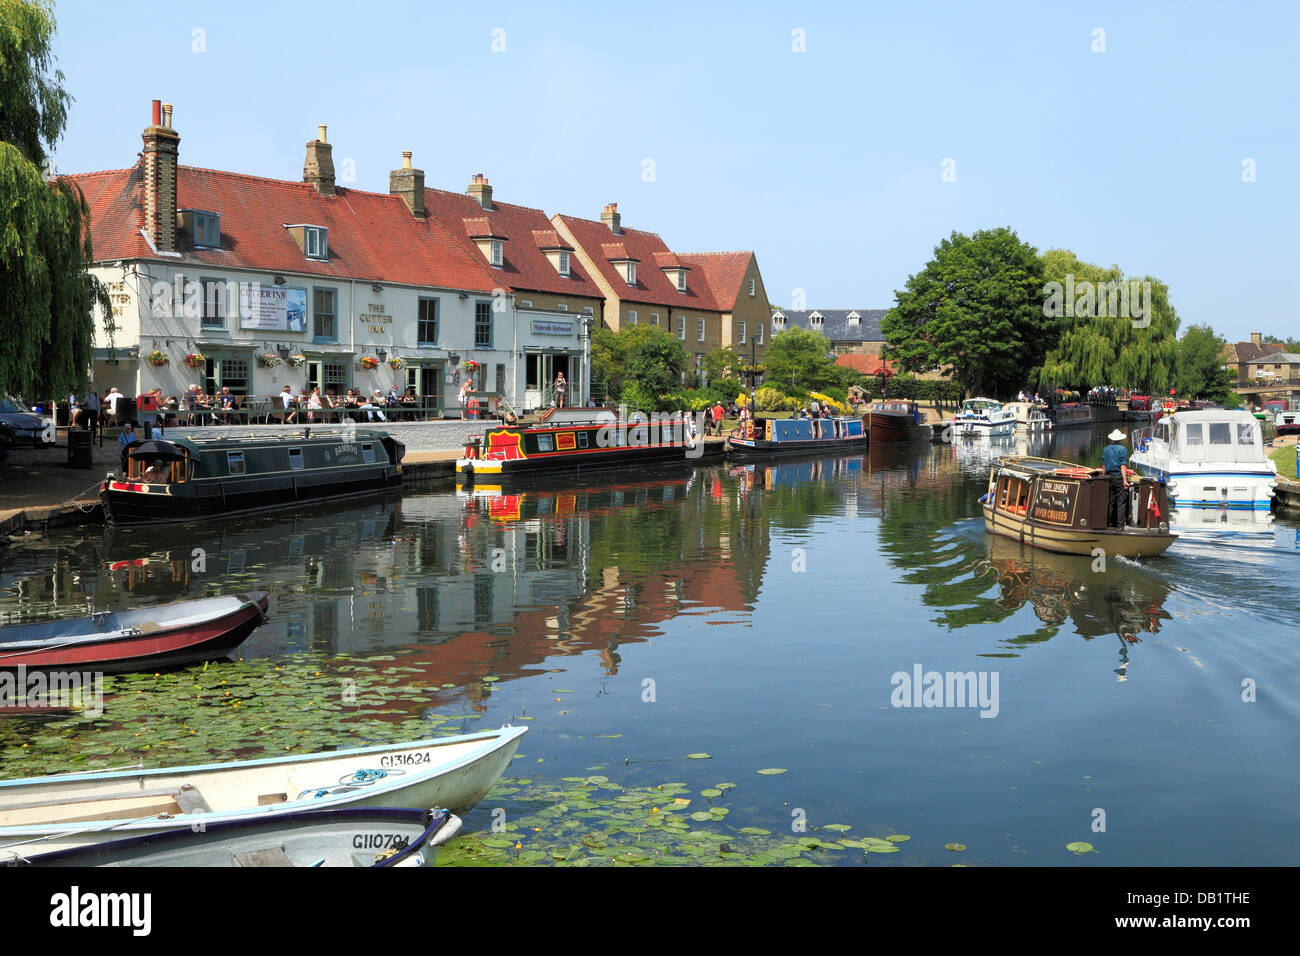 Ely, River Ouse, Cutter Inn, Barges boats English rivers riverside pubs inns pub, Cambridgeshire England UK Stock Photo